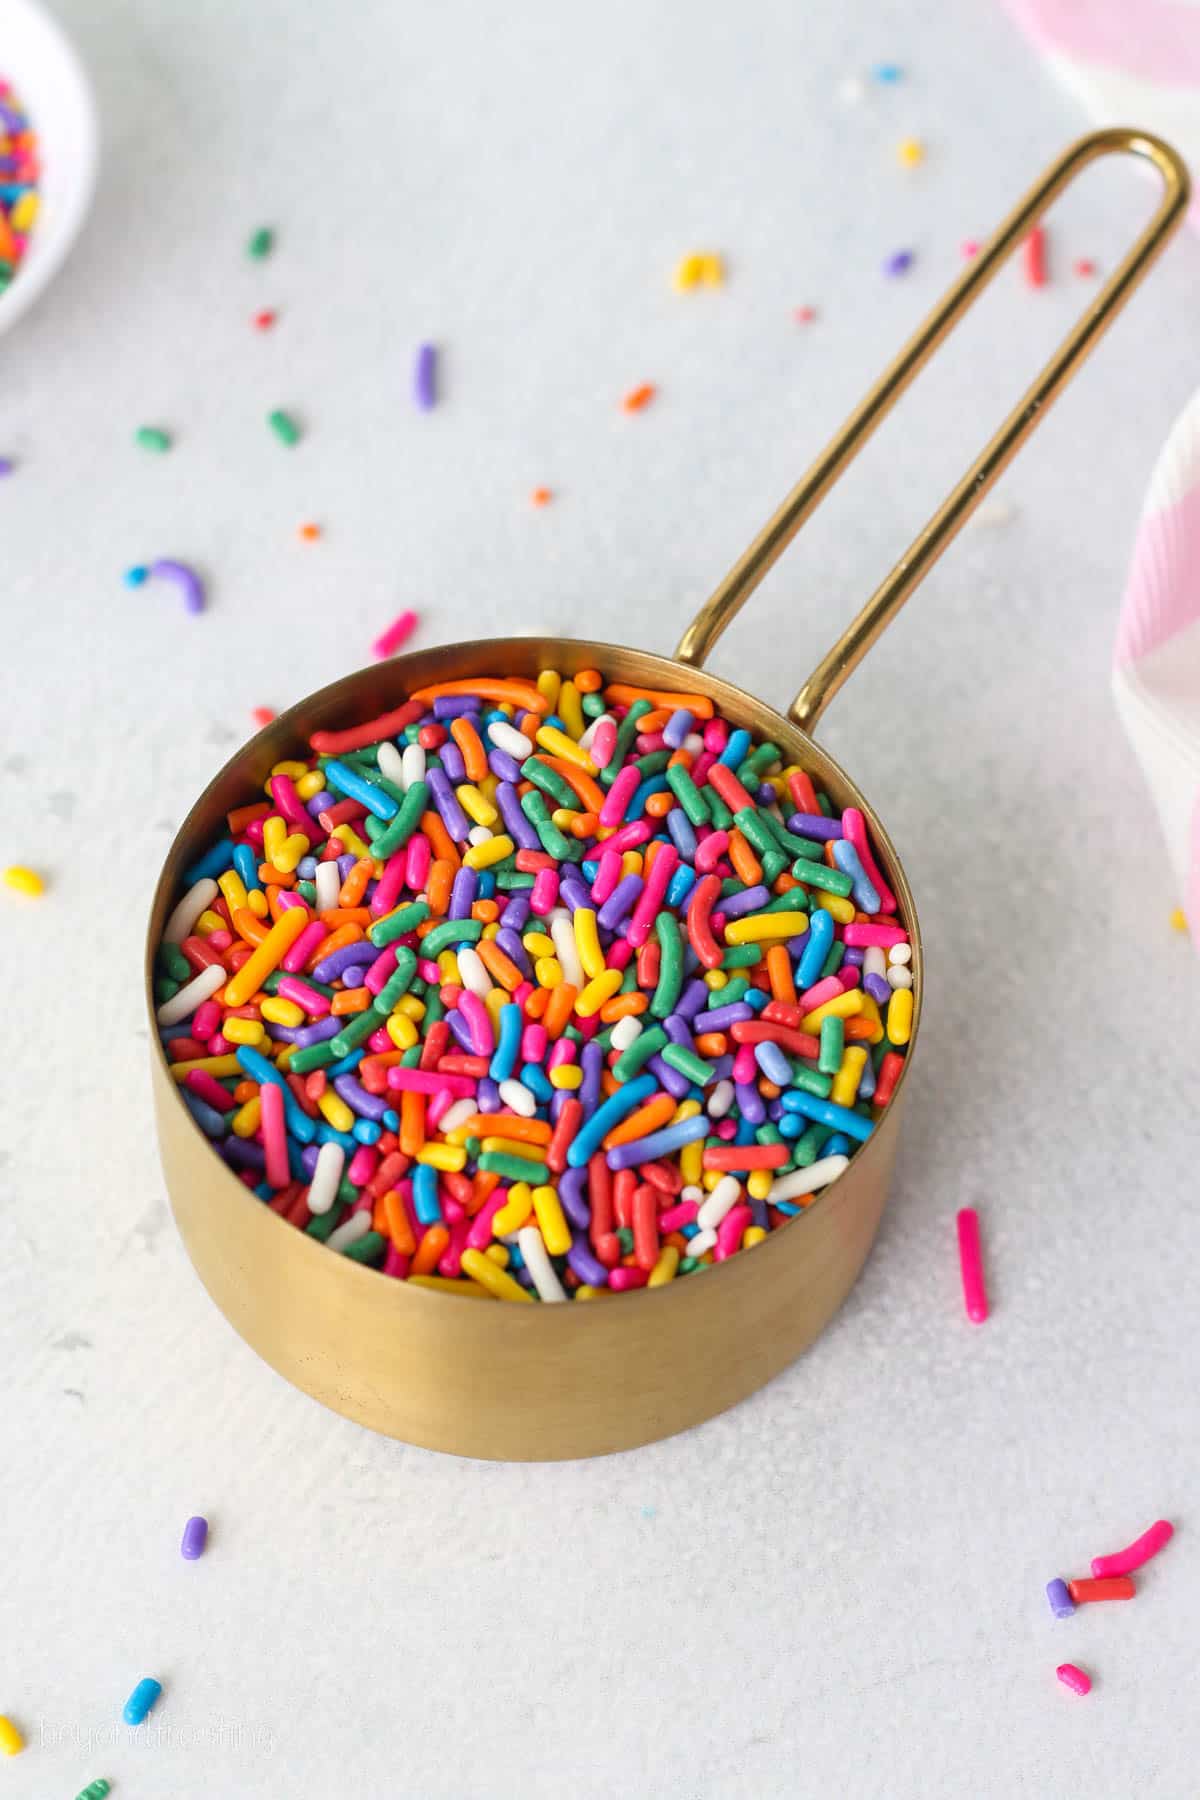 A measuring cup filled with rainbow sprinkles on a countertop.